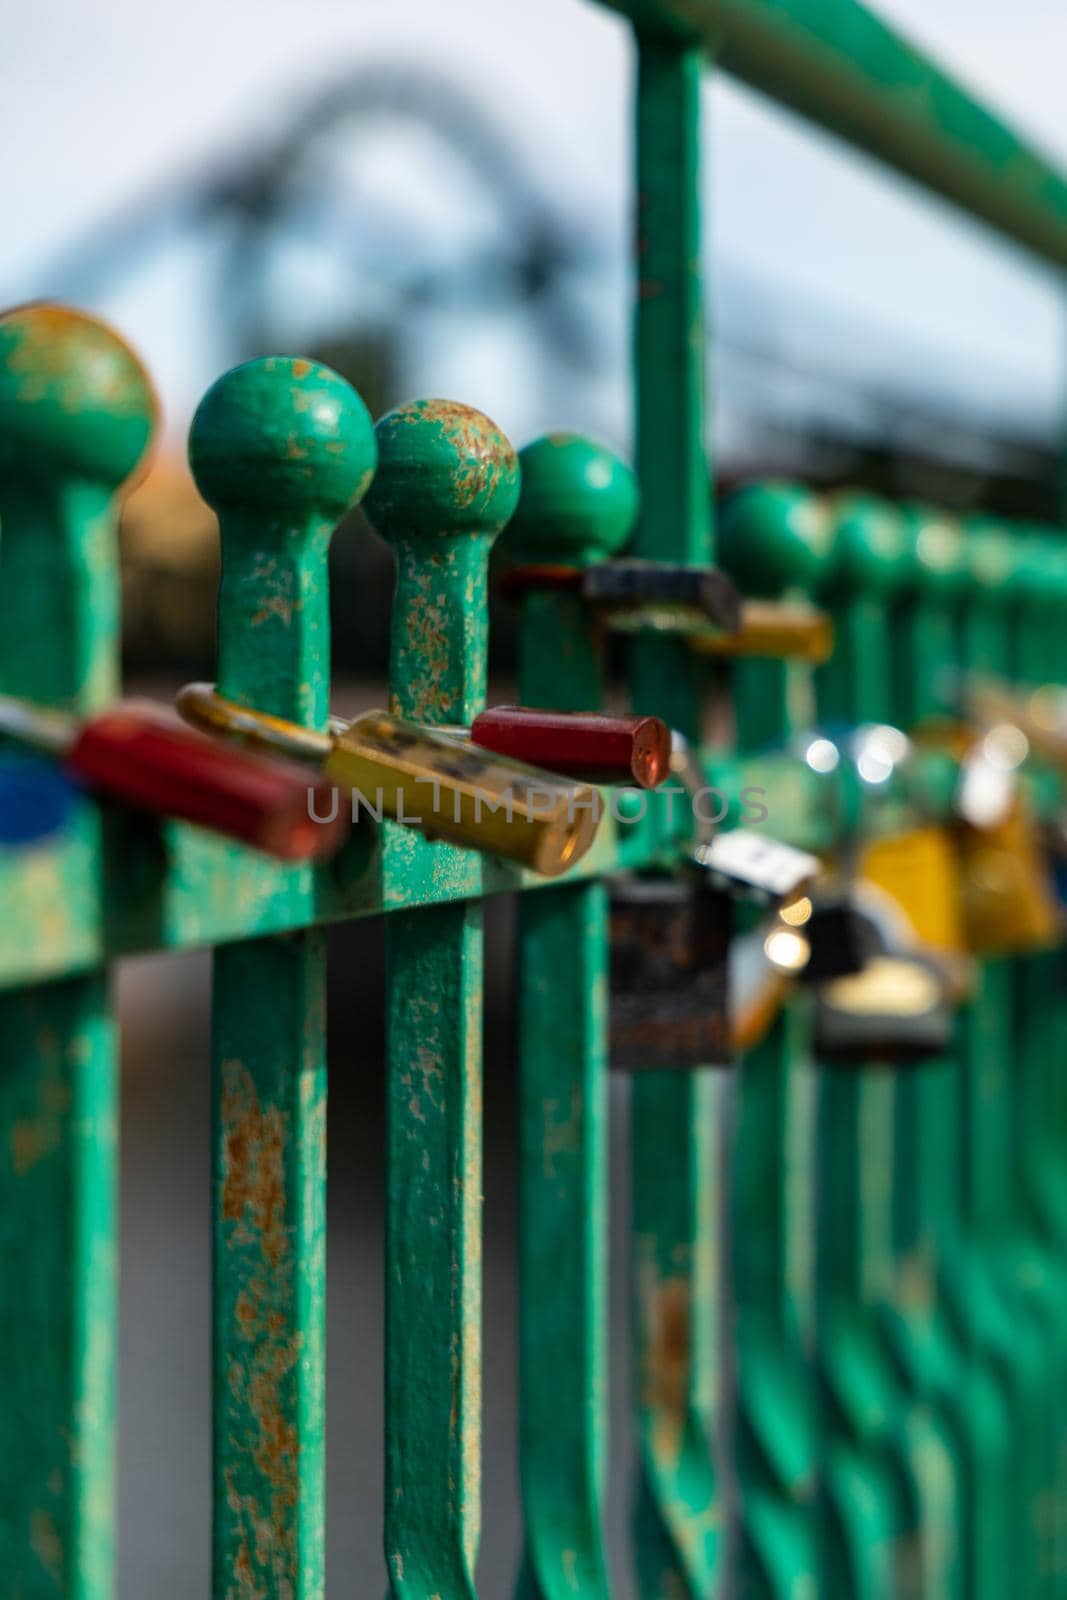 A lot of old padlocks hanging on old green fence by Wierzchu